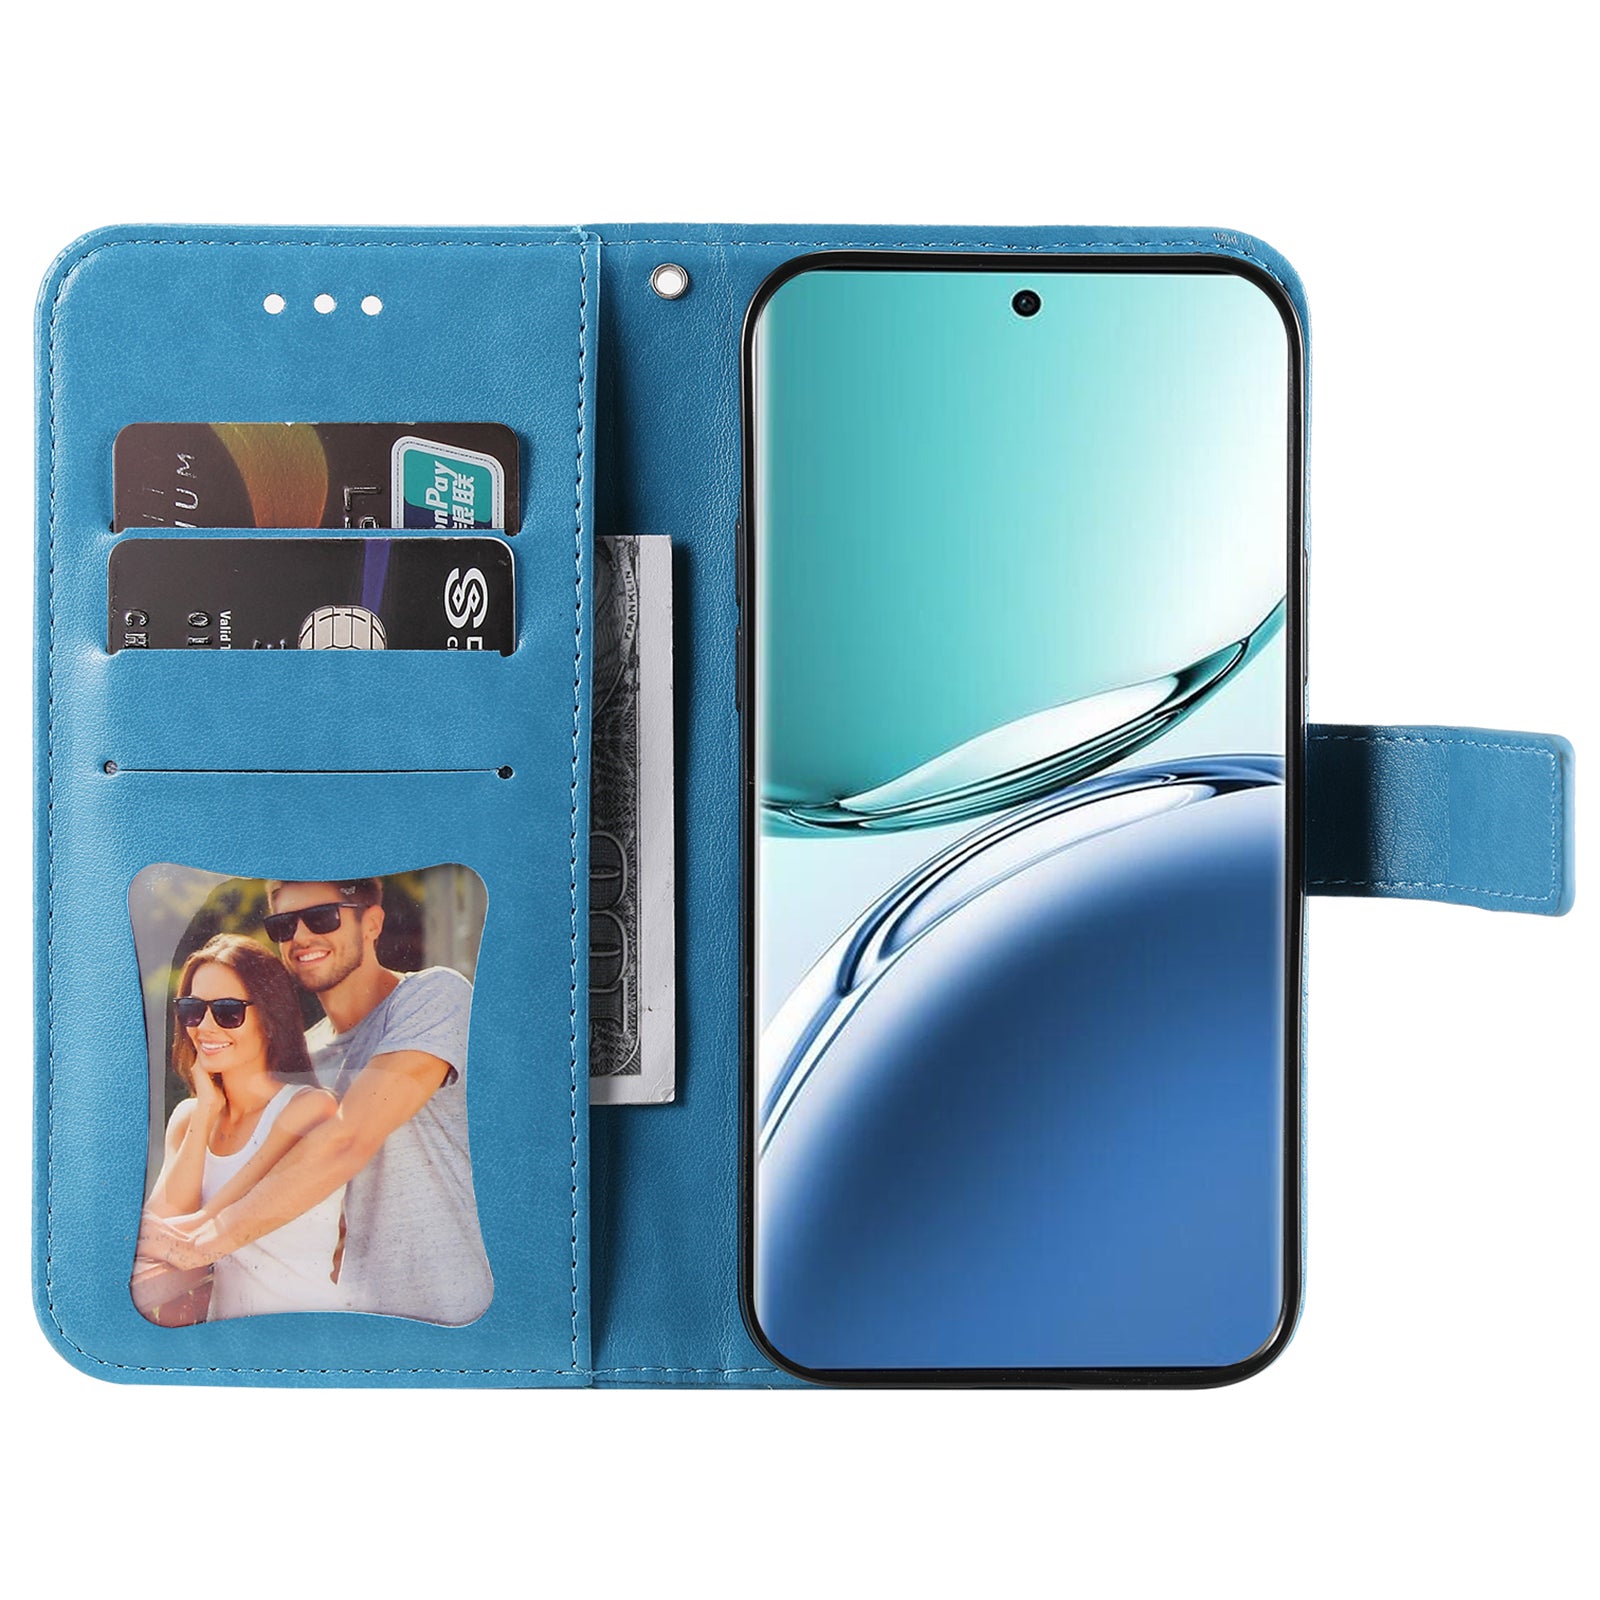 For Oppo A3 Pro 5G Wallet Case Flower Pattern PU Leather Phone Cover with Magnetic Clasp - Blue